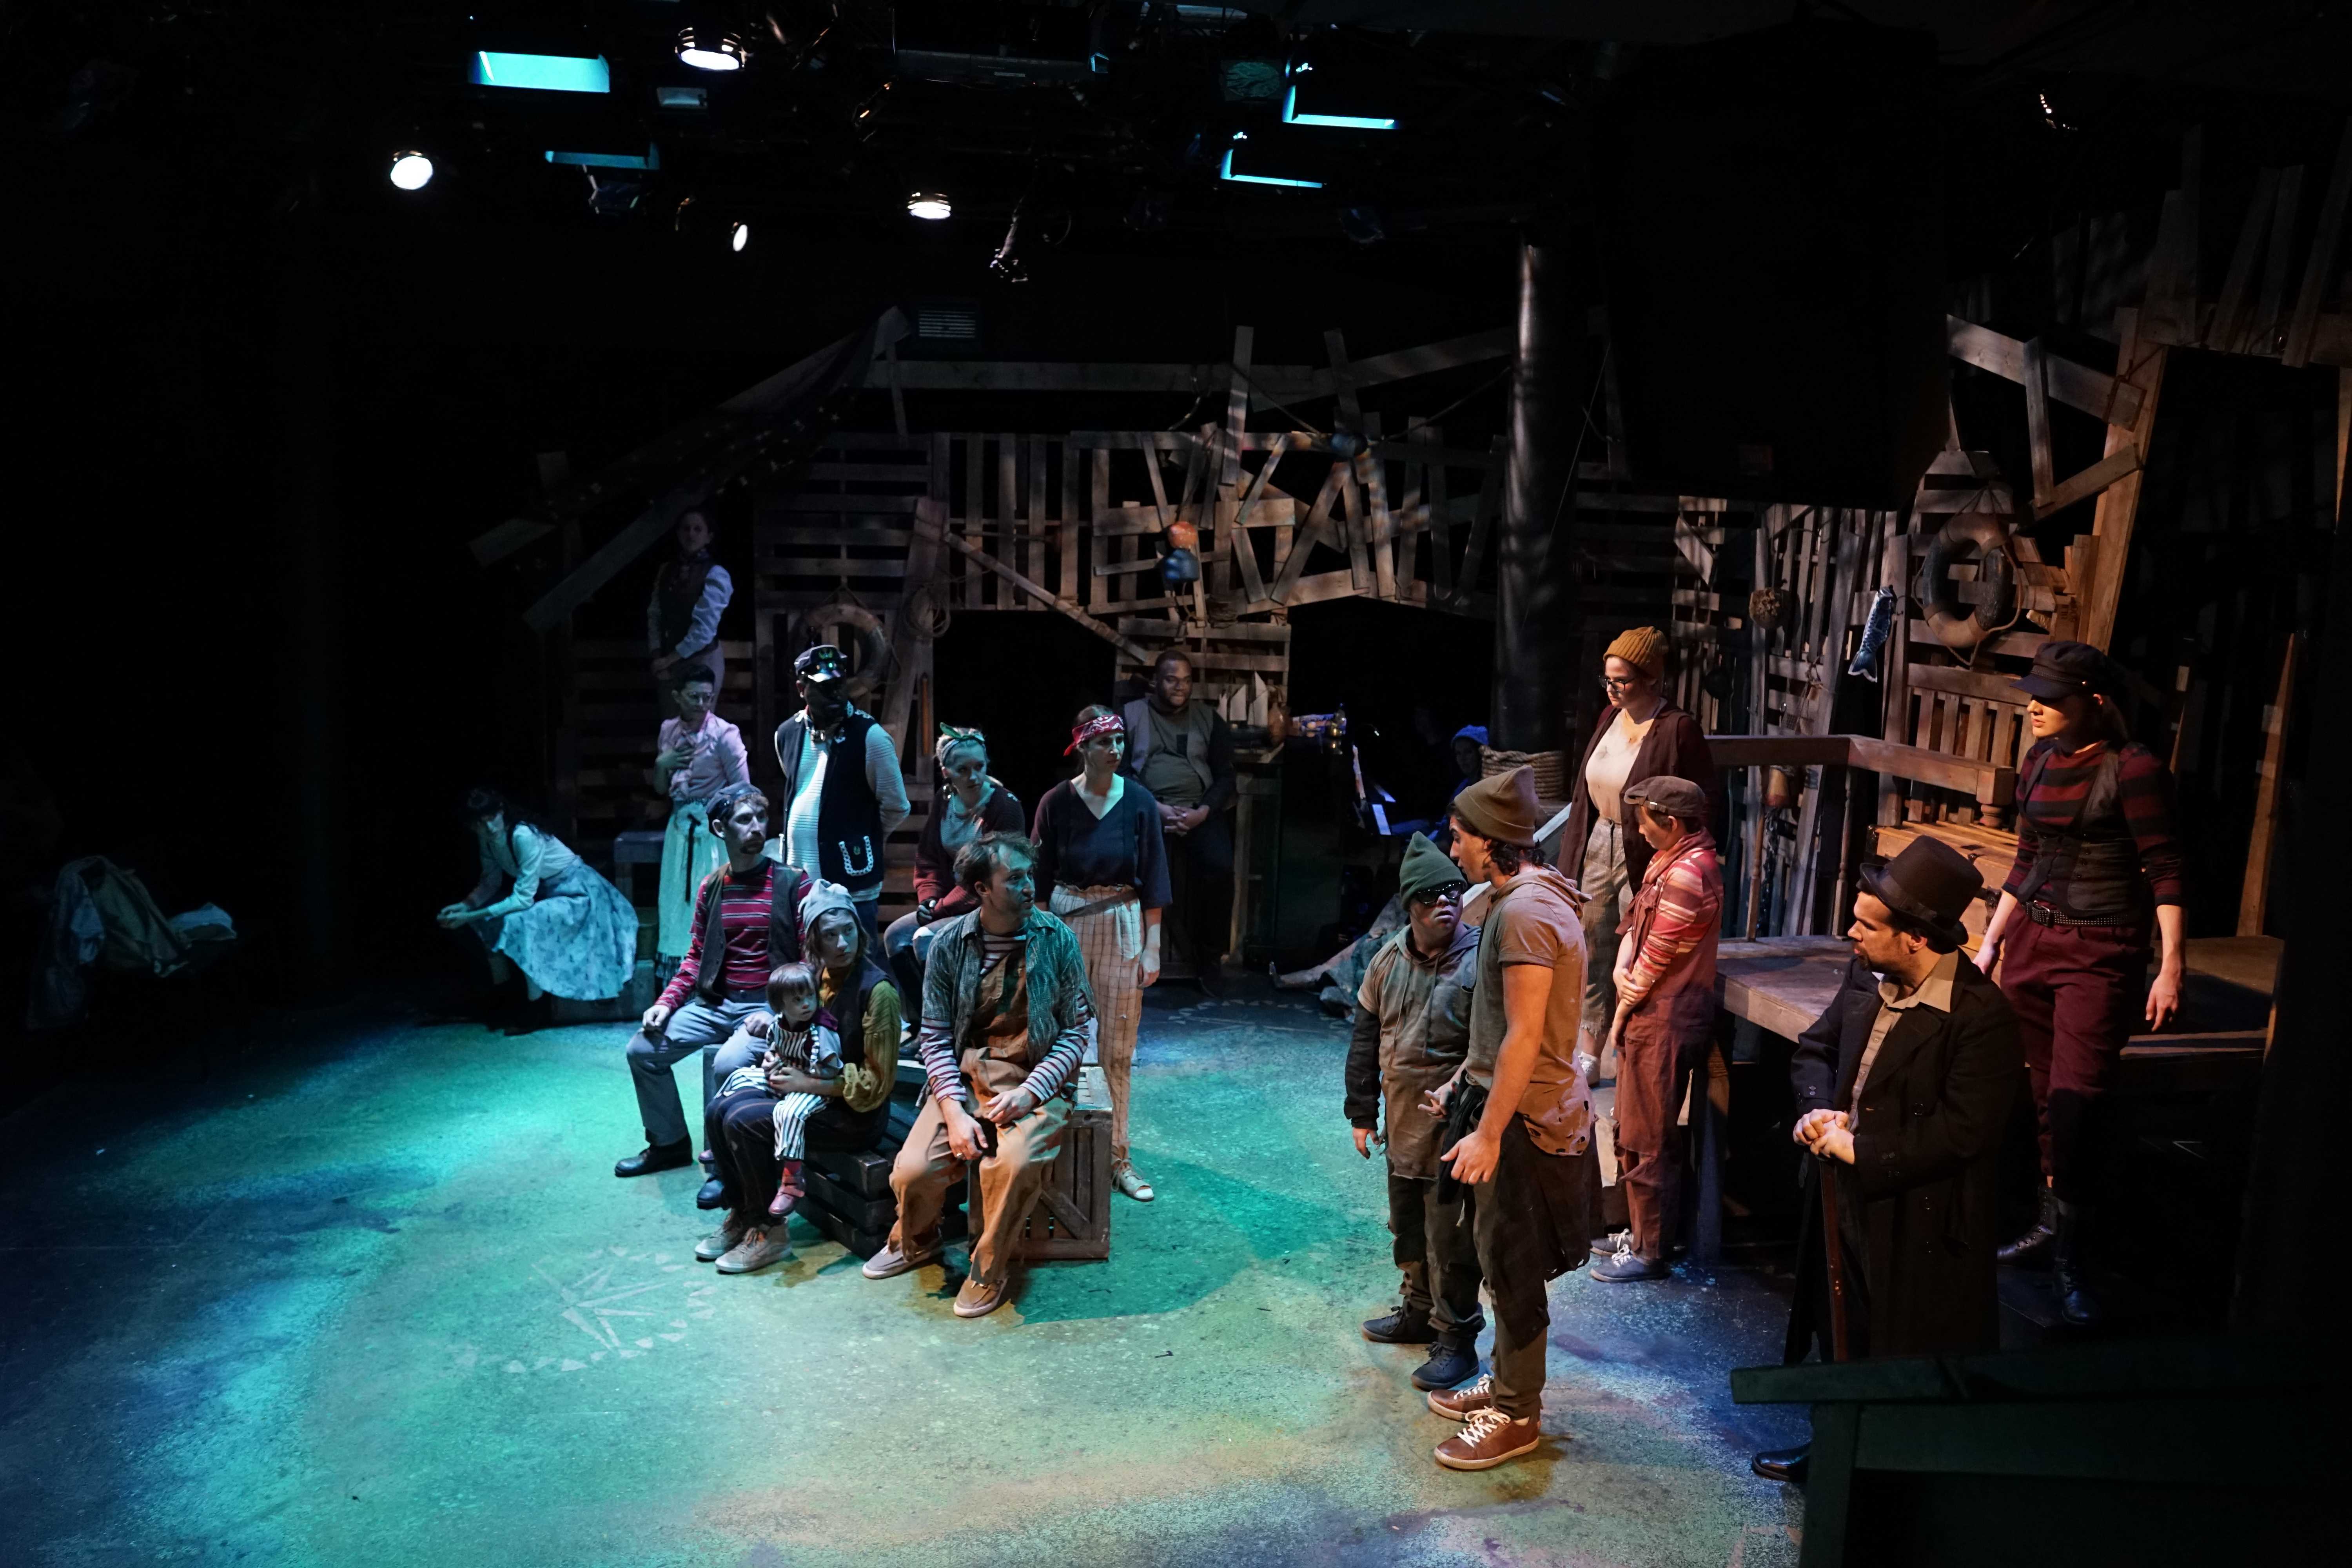 A scene from the production of Peter the Starcatcher. (Courtesy of NYU Steinhardt Educational Theater Program)